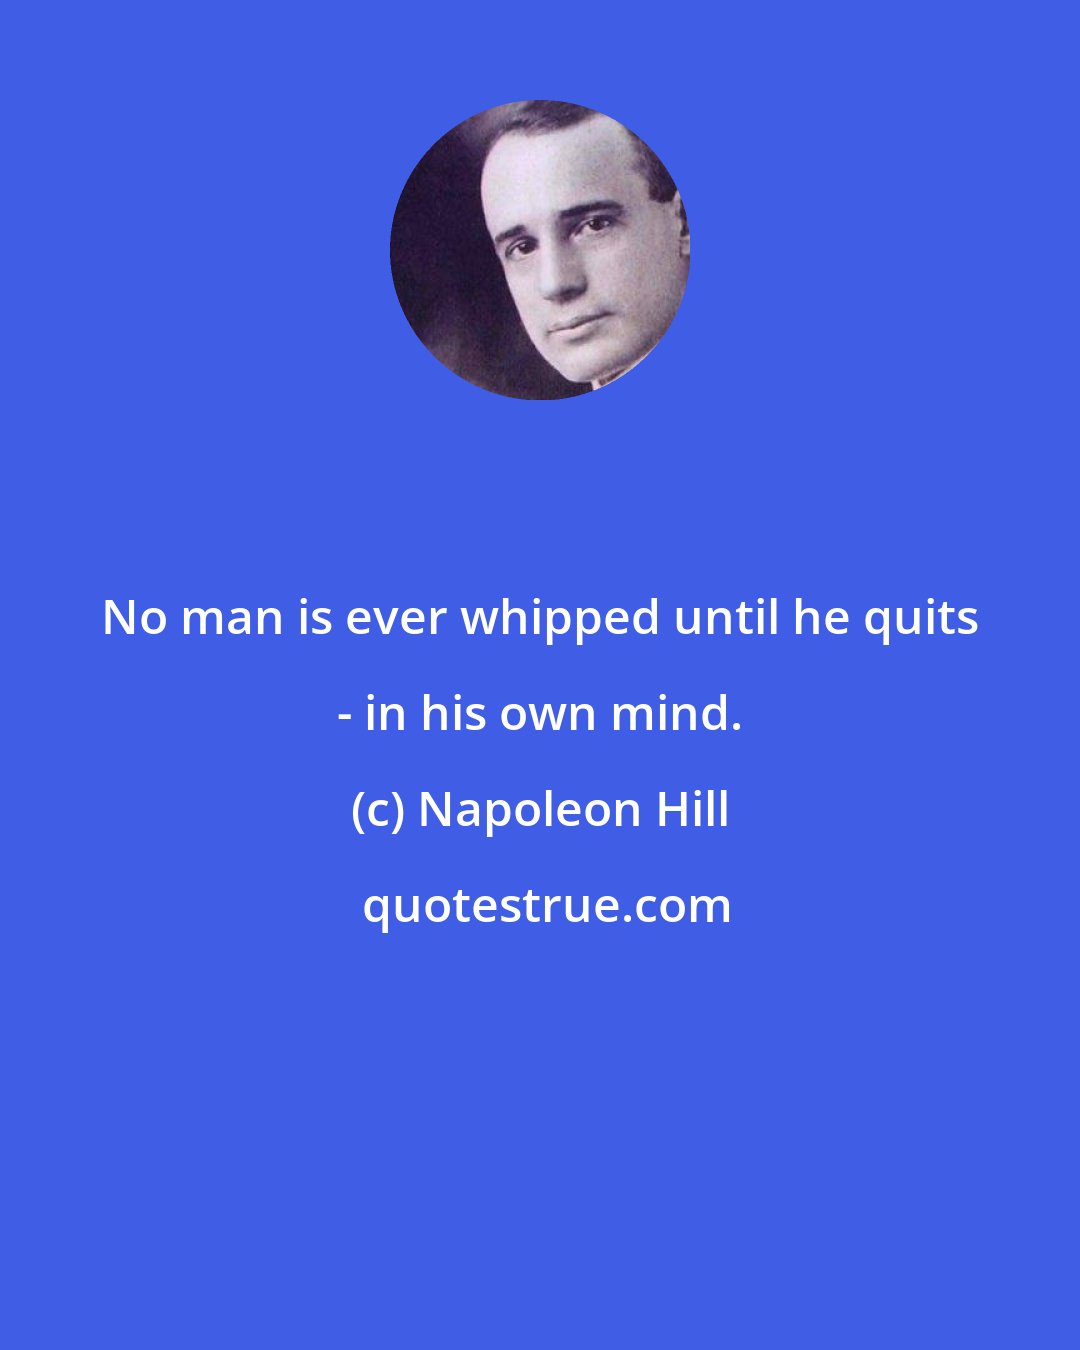 Napoleon Hill: No man is ever whipped until he quits - in his own mind.